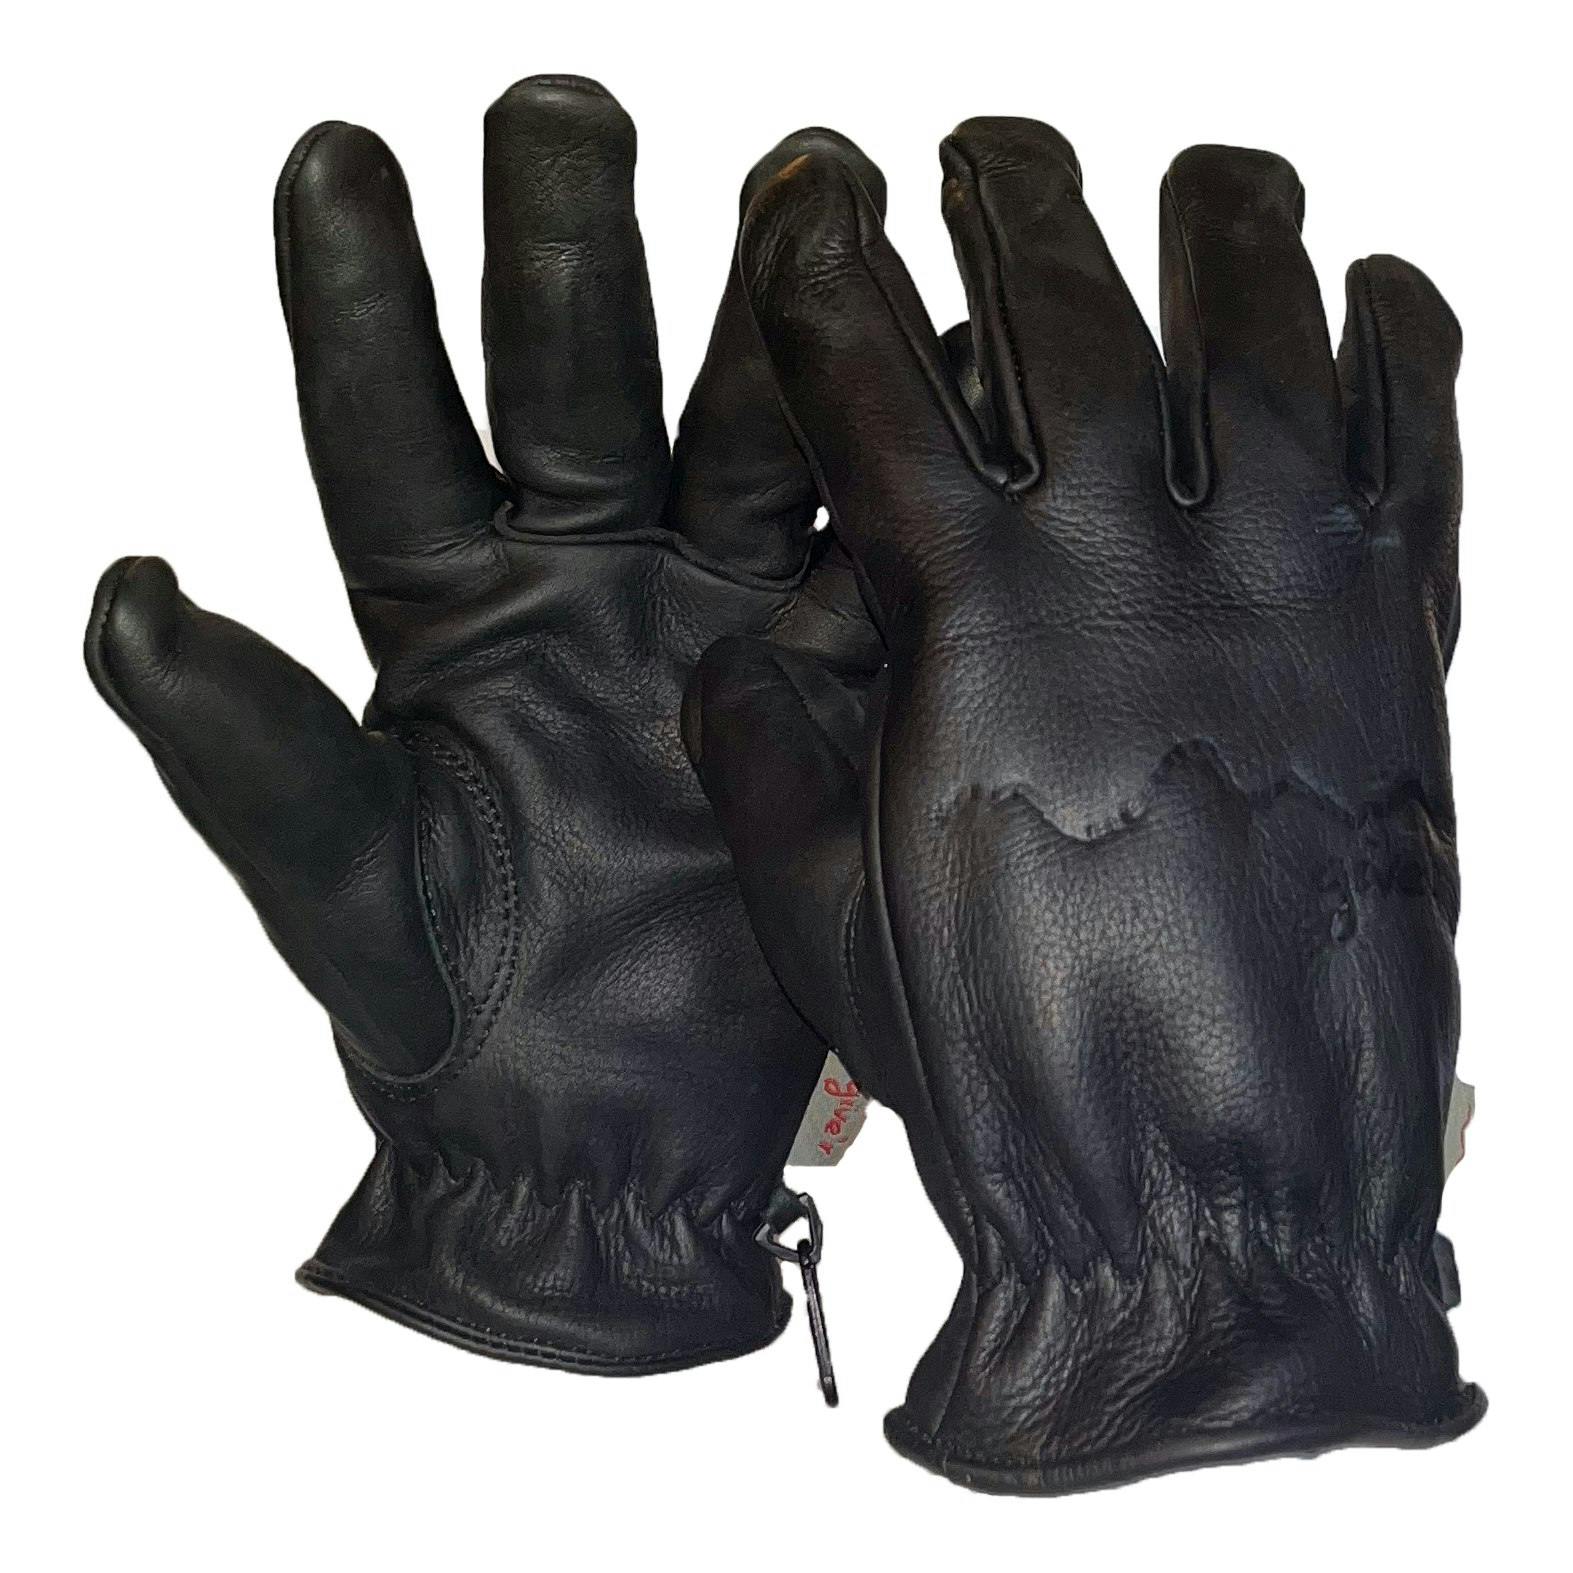 Give'r 4 Season Glove w/ Wax Coating - Exclusive - Chestnut, Gloves &  Scarves